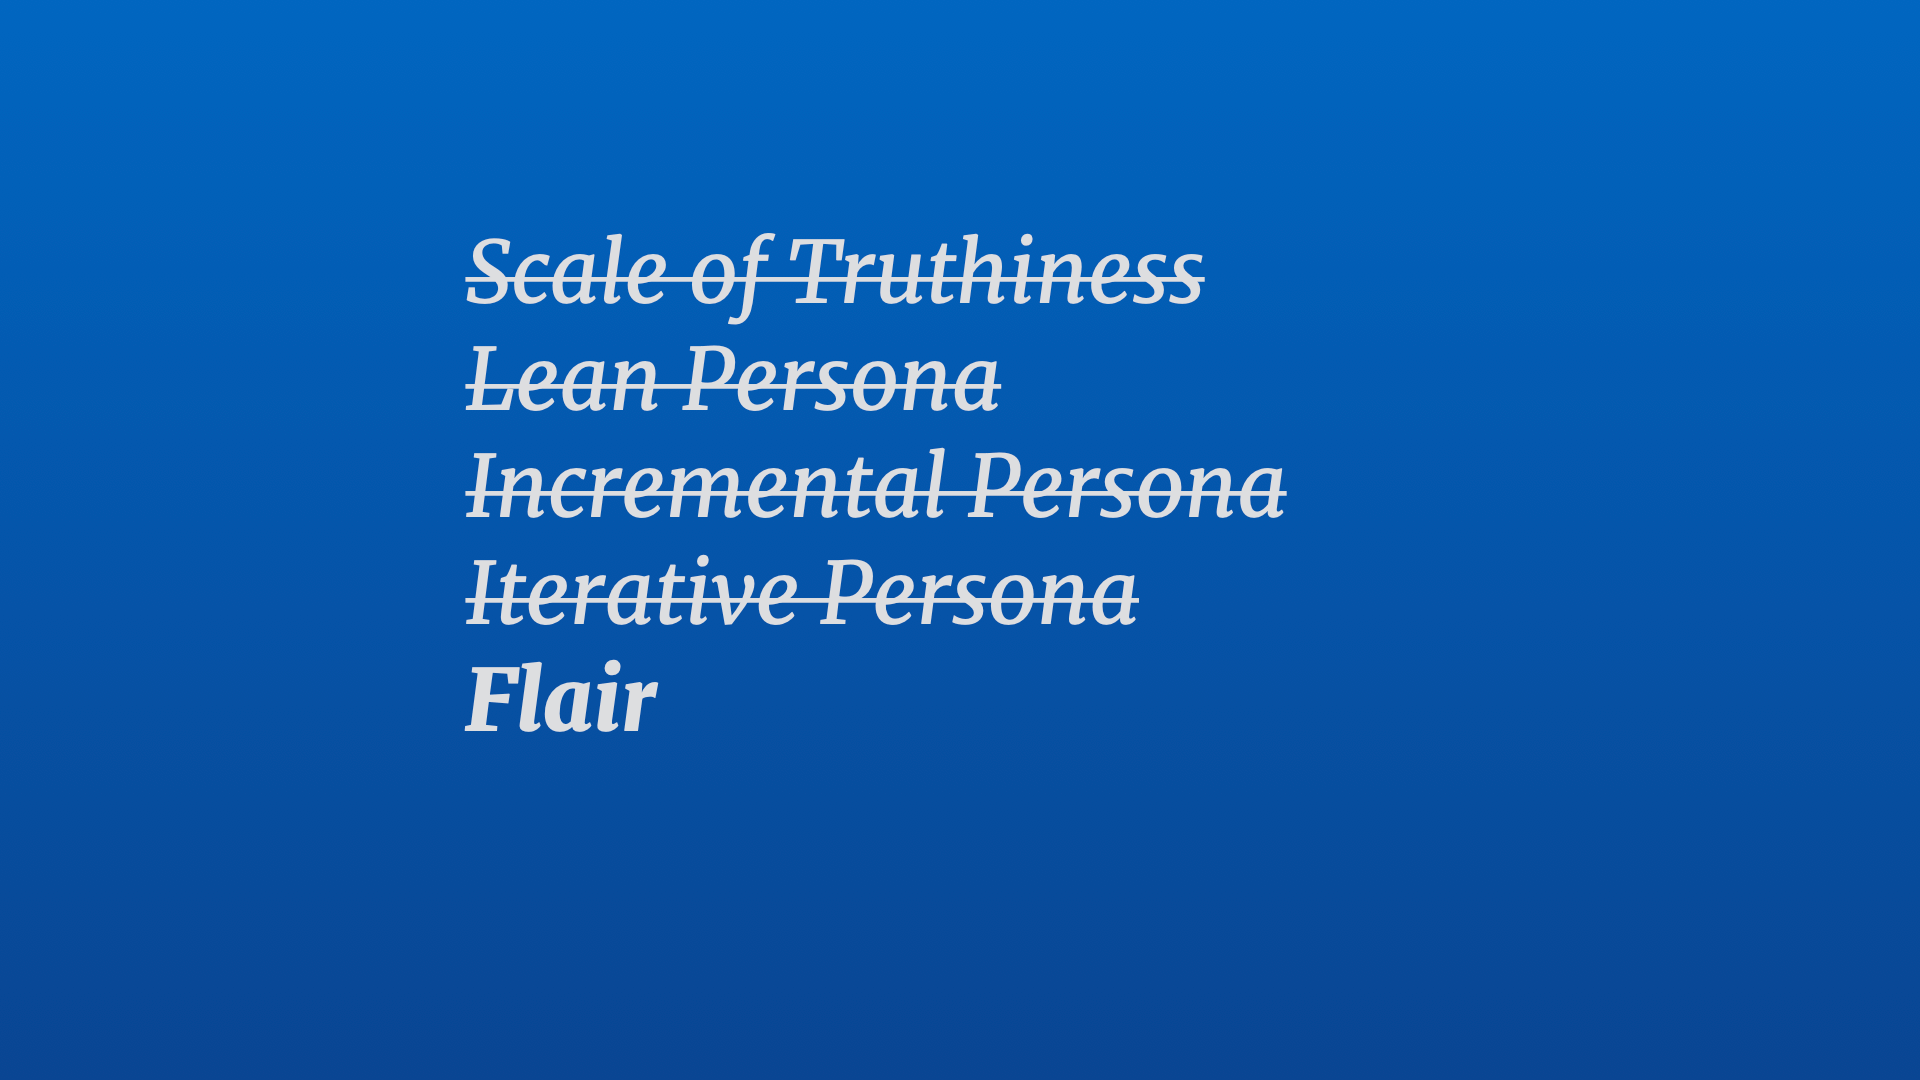 Text title: Flair (underneath a list of old crossed out titles titles: 'Scale of Truthiness', 'Lean Persona', 'Incremental Persona', and 'Iterative Persona')